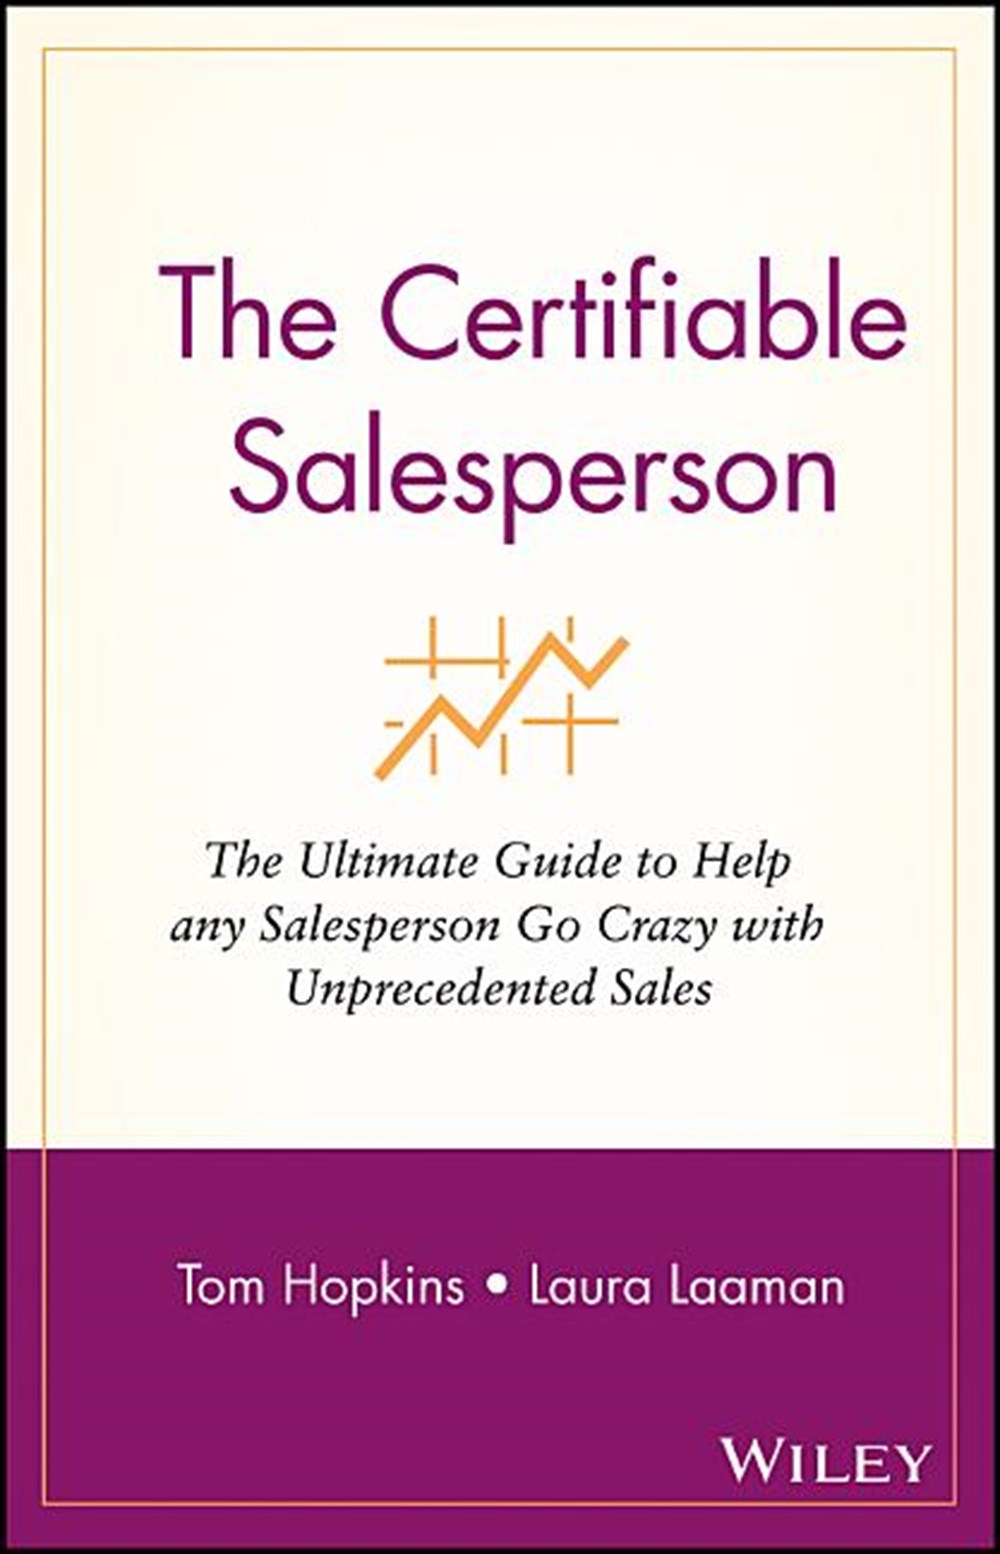 Certifiable Salesperson: The Ultimate Guide to Help Any Salesperson Go Crazy with Unprecedented Sale